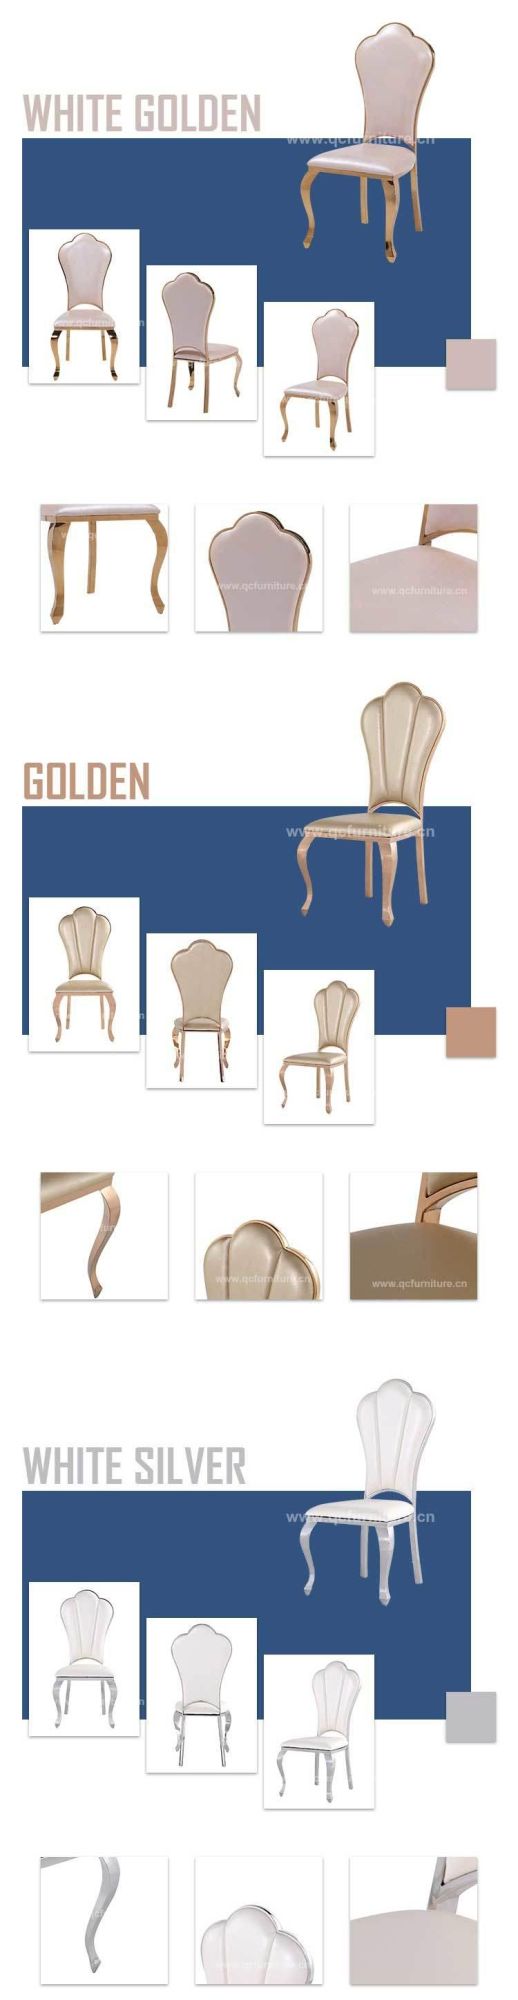 Hot Wholesale Upholstery Modern Stainless Steel PU Leather Dining Chair with Gold Legs